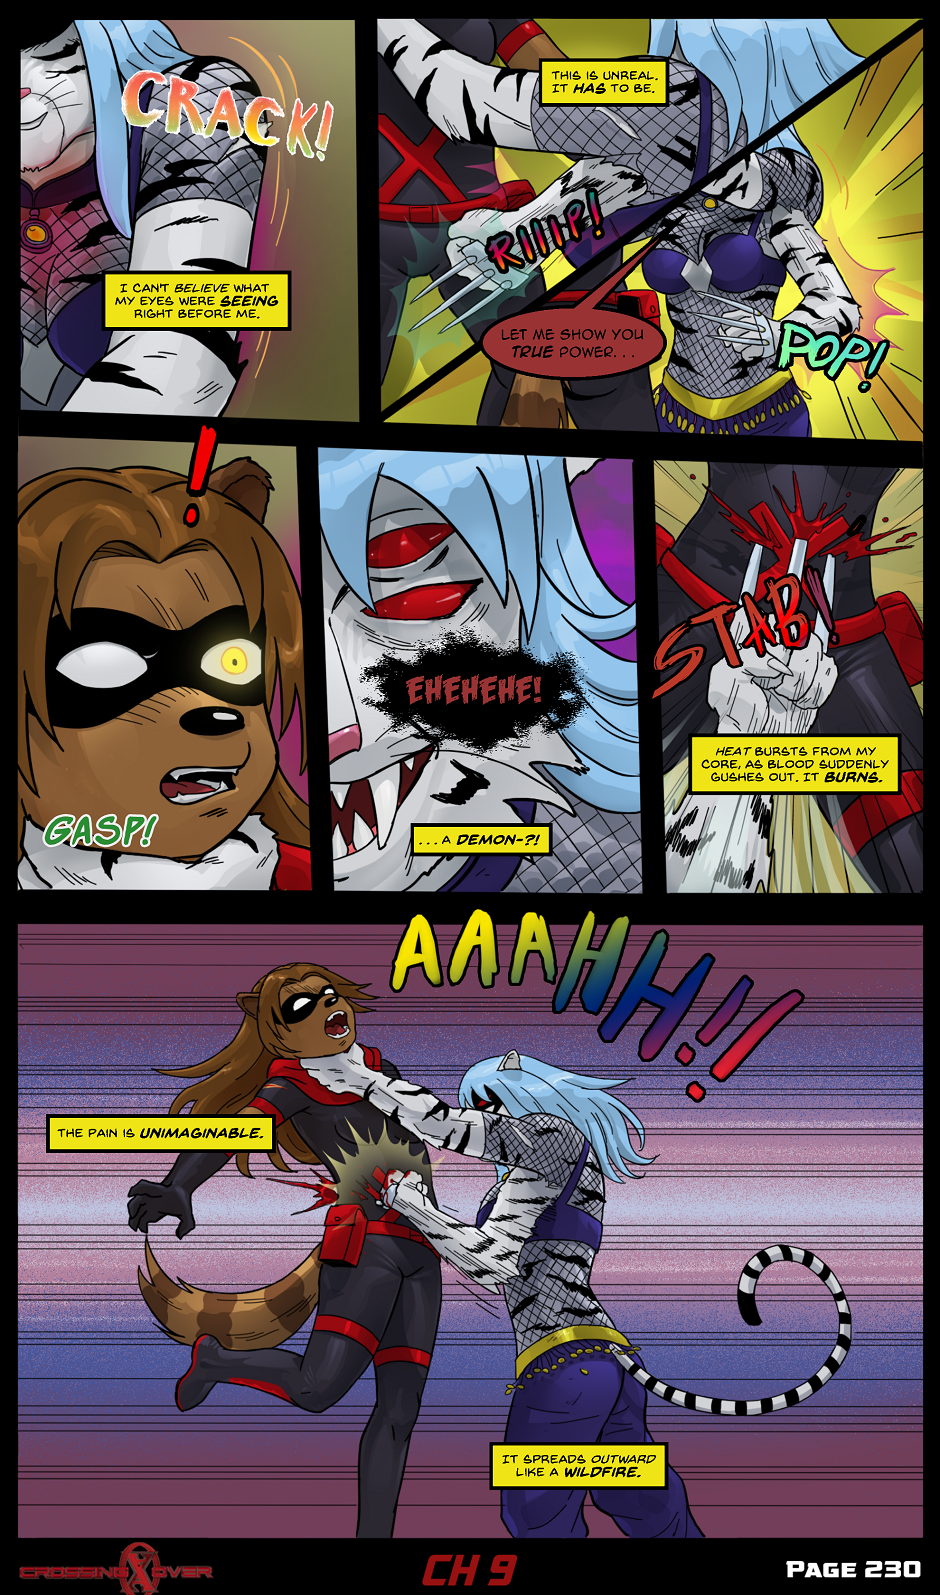 Page 230 (Ch 9)